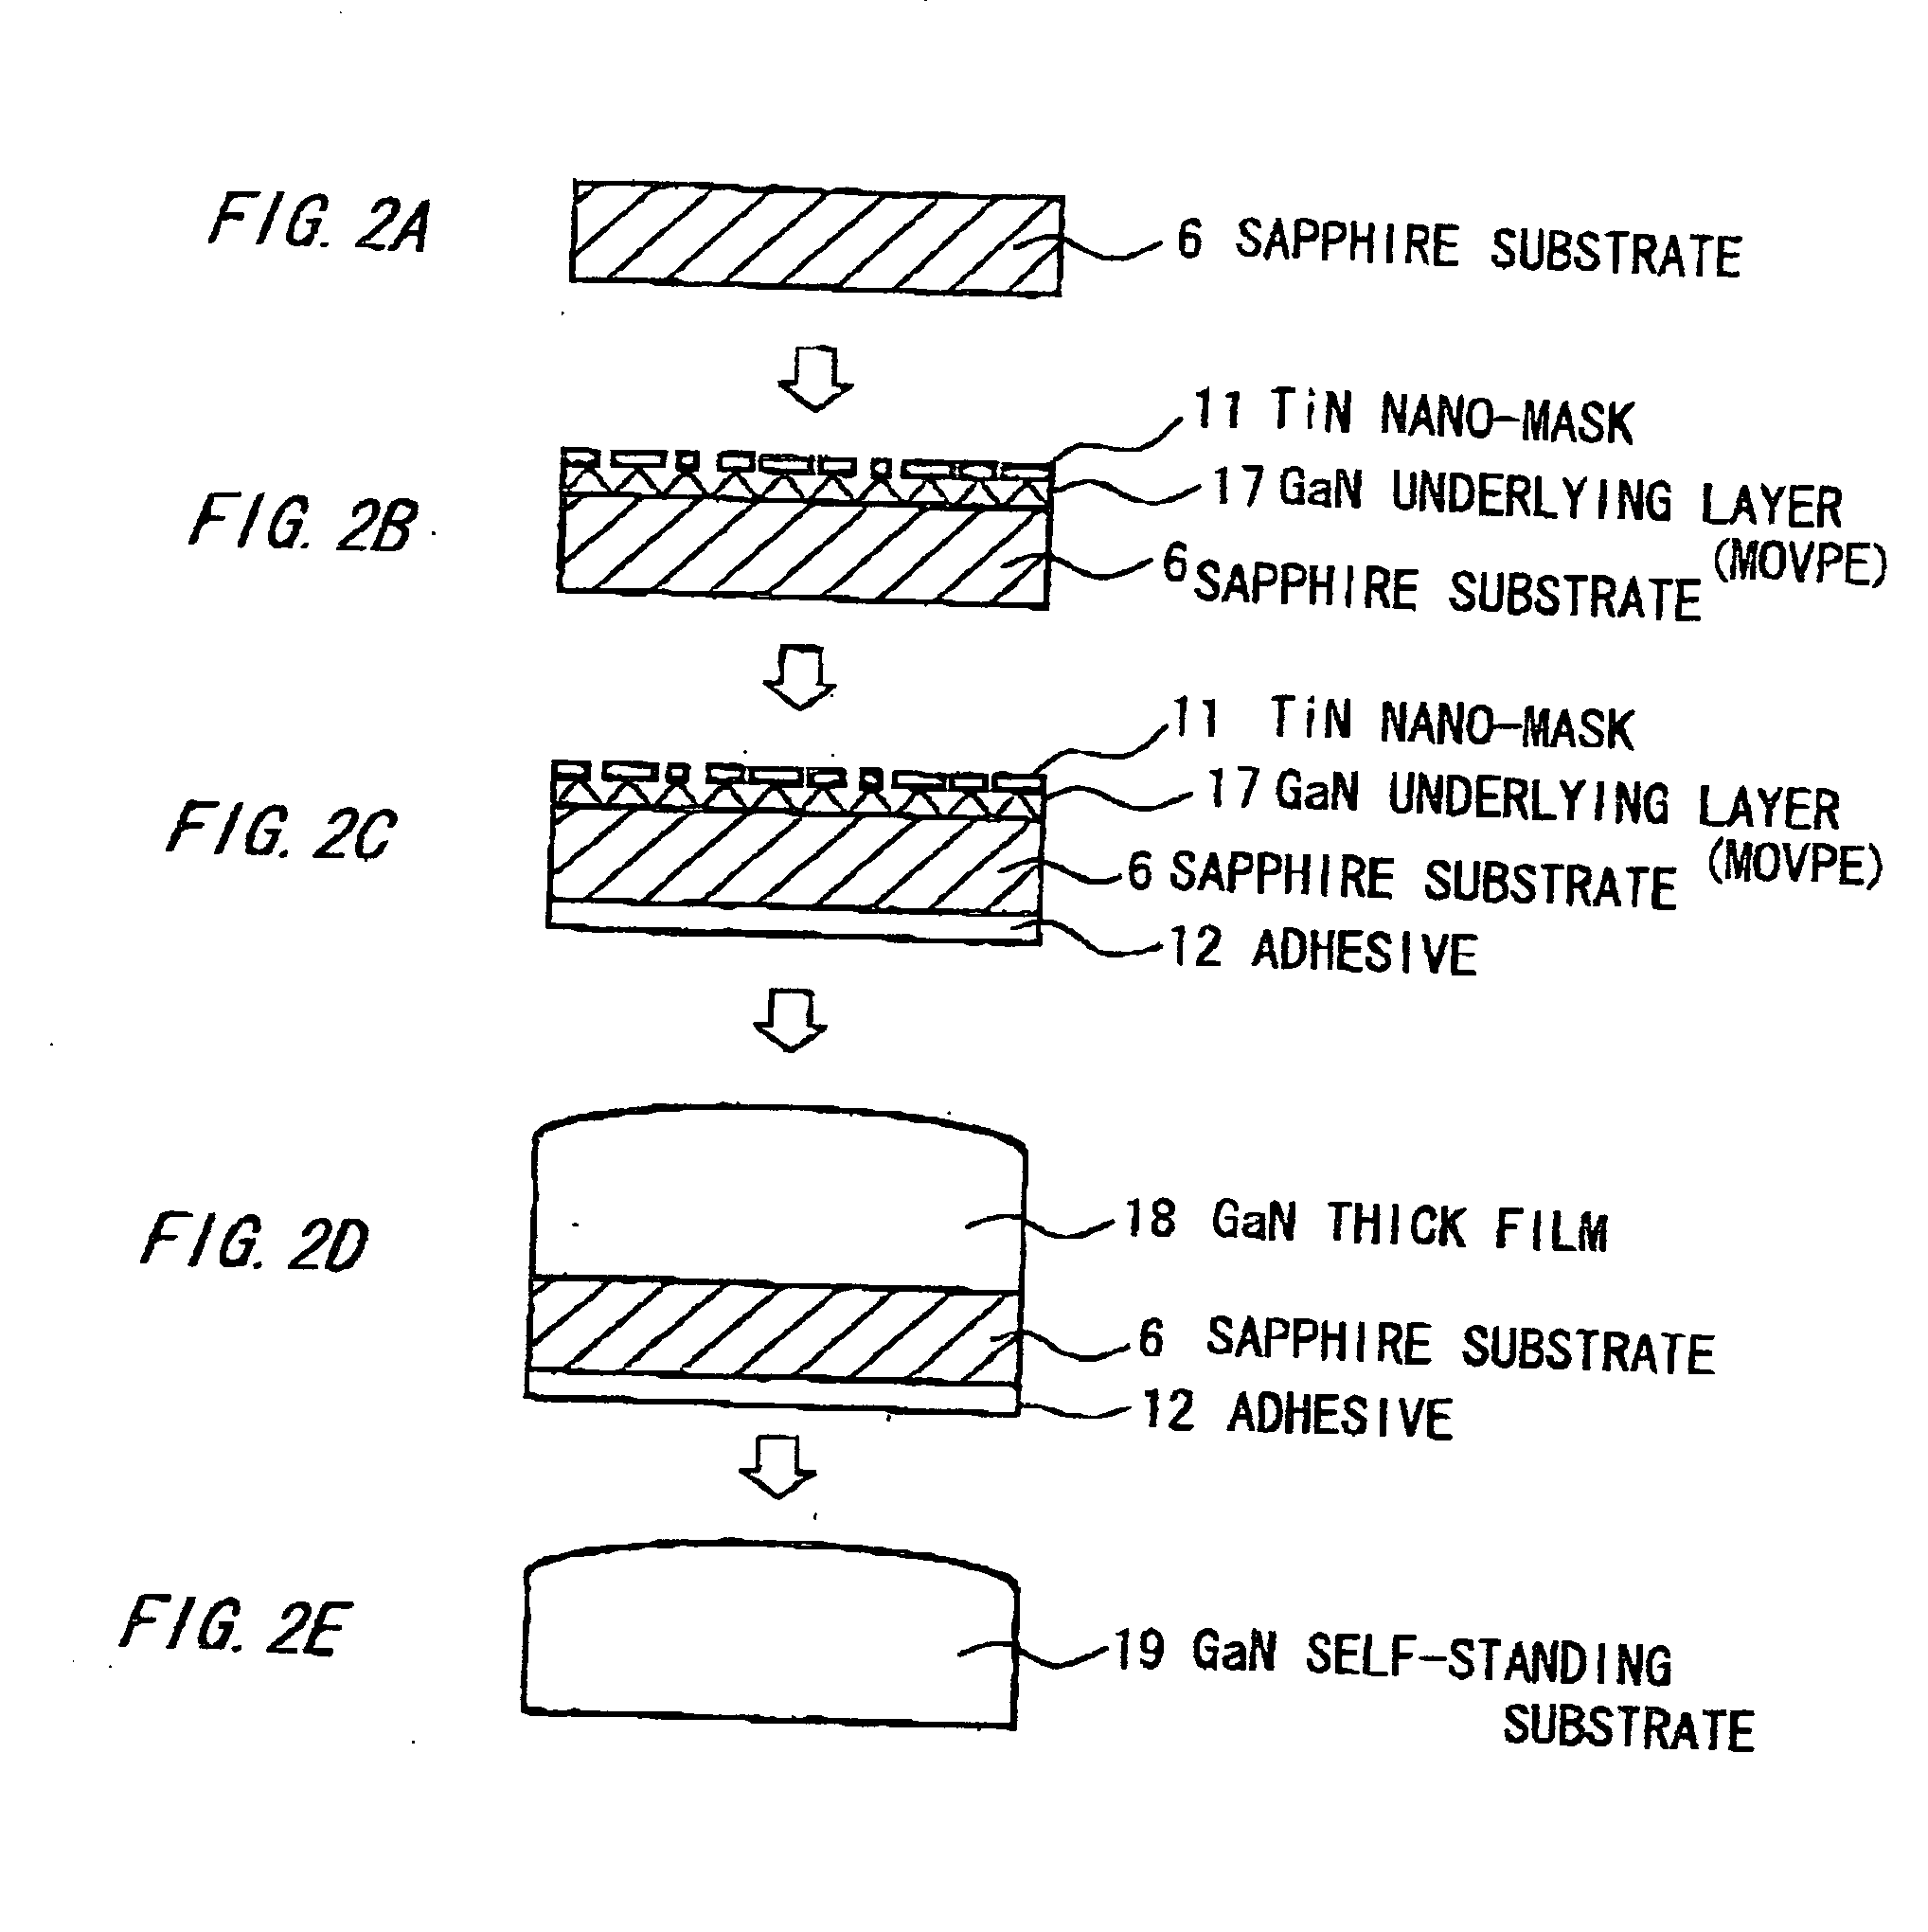 Group III-V nitride-based semiconductor substrate and method of making same